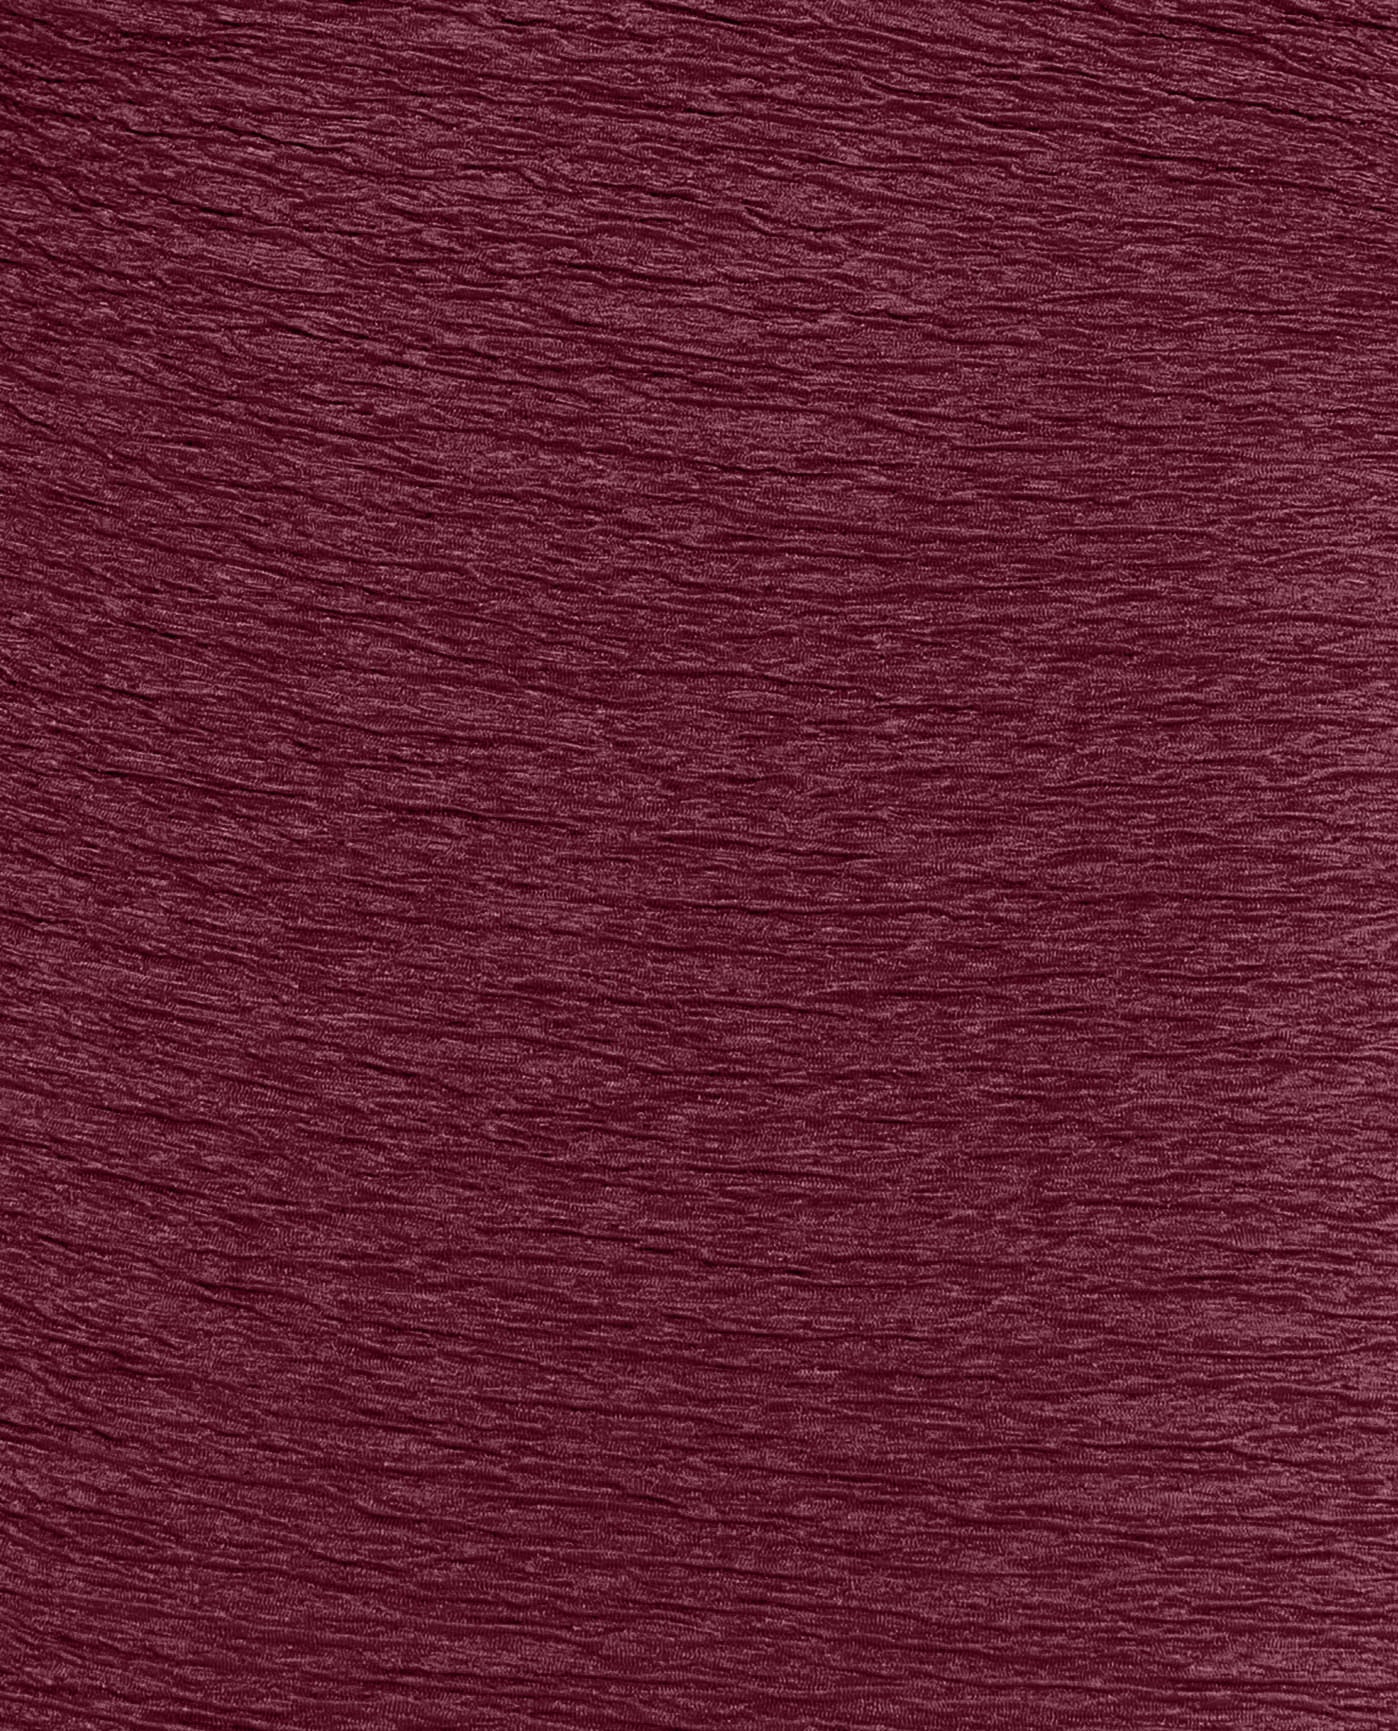 FABRIC SWATCH VIEW OF CHLORINE RESISTANT KRINKLE TEXTURED SOLID TWIST FRONT ONE PIECE | KRINKLE WINE